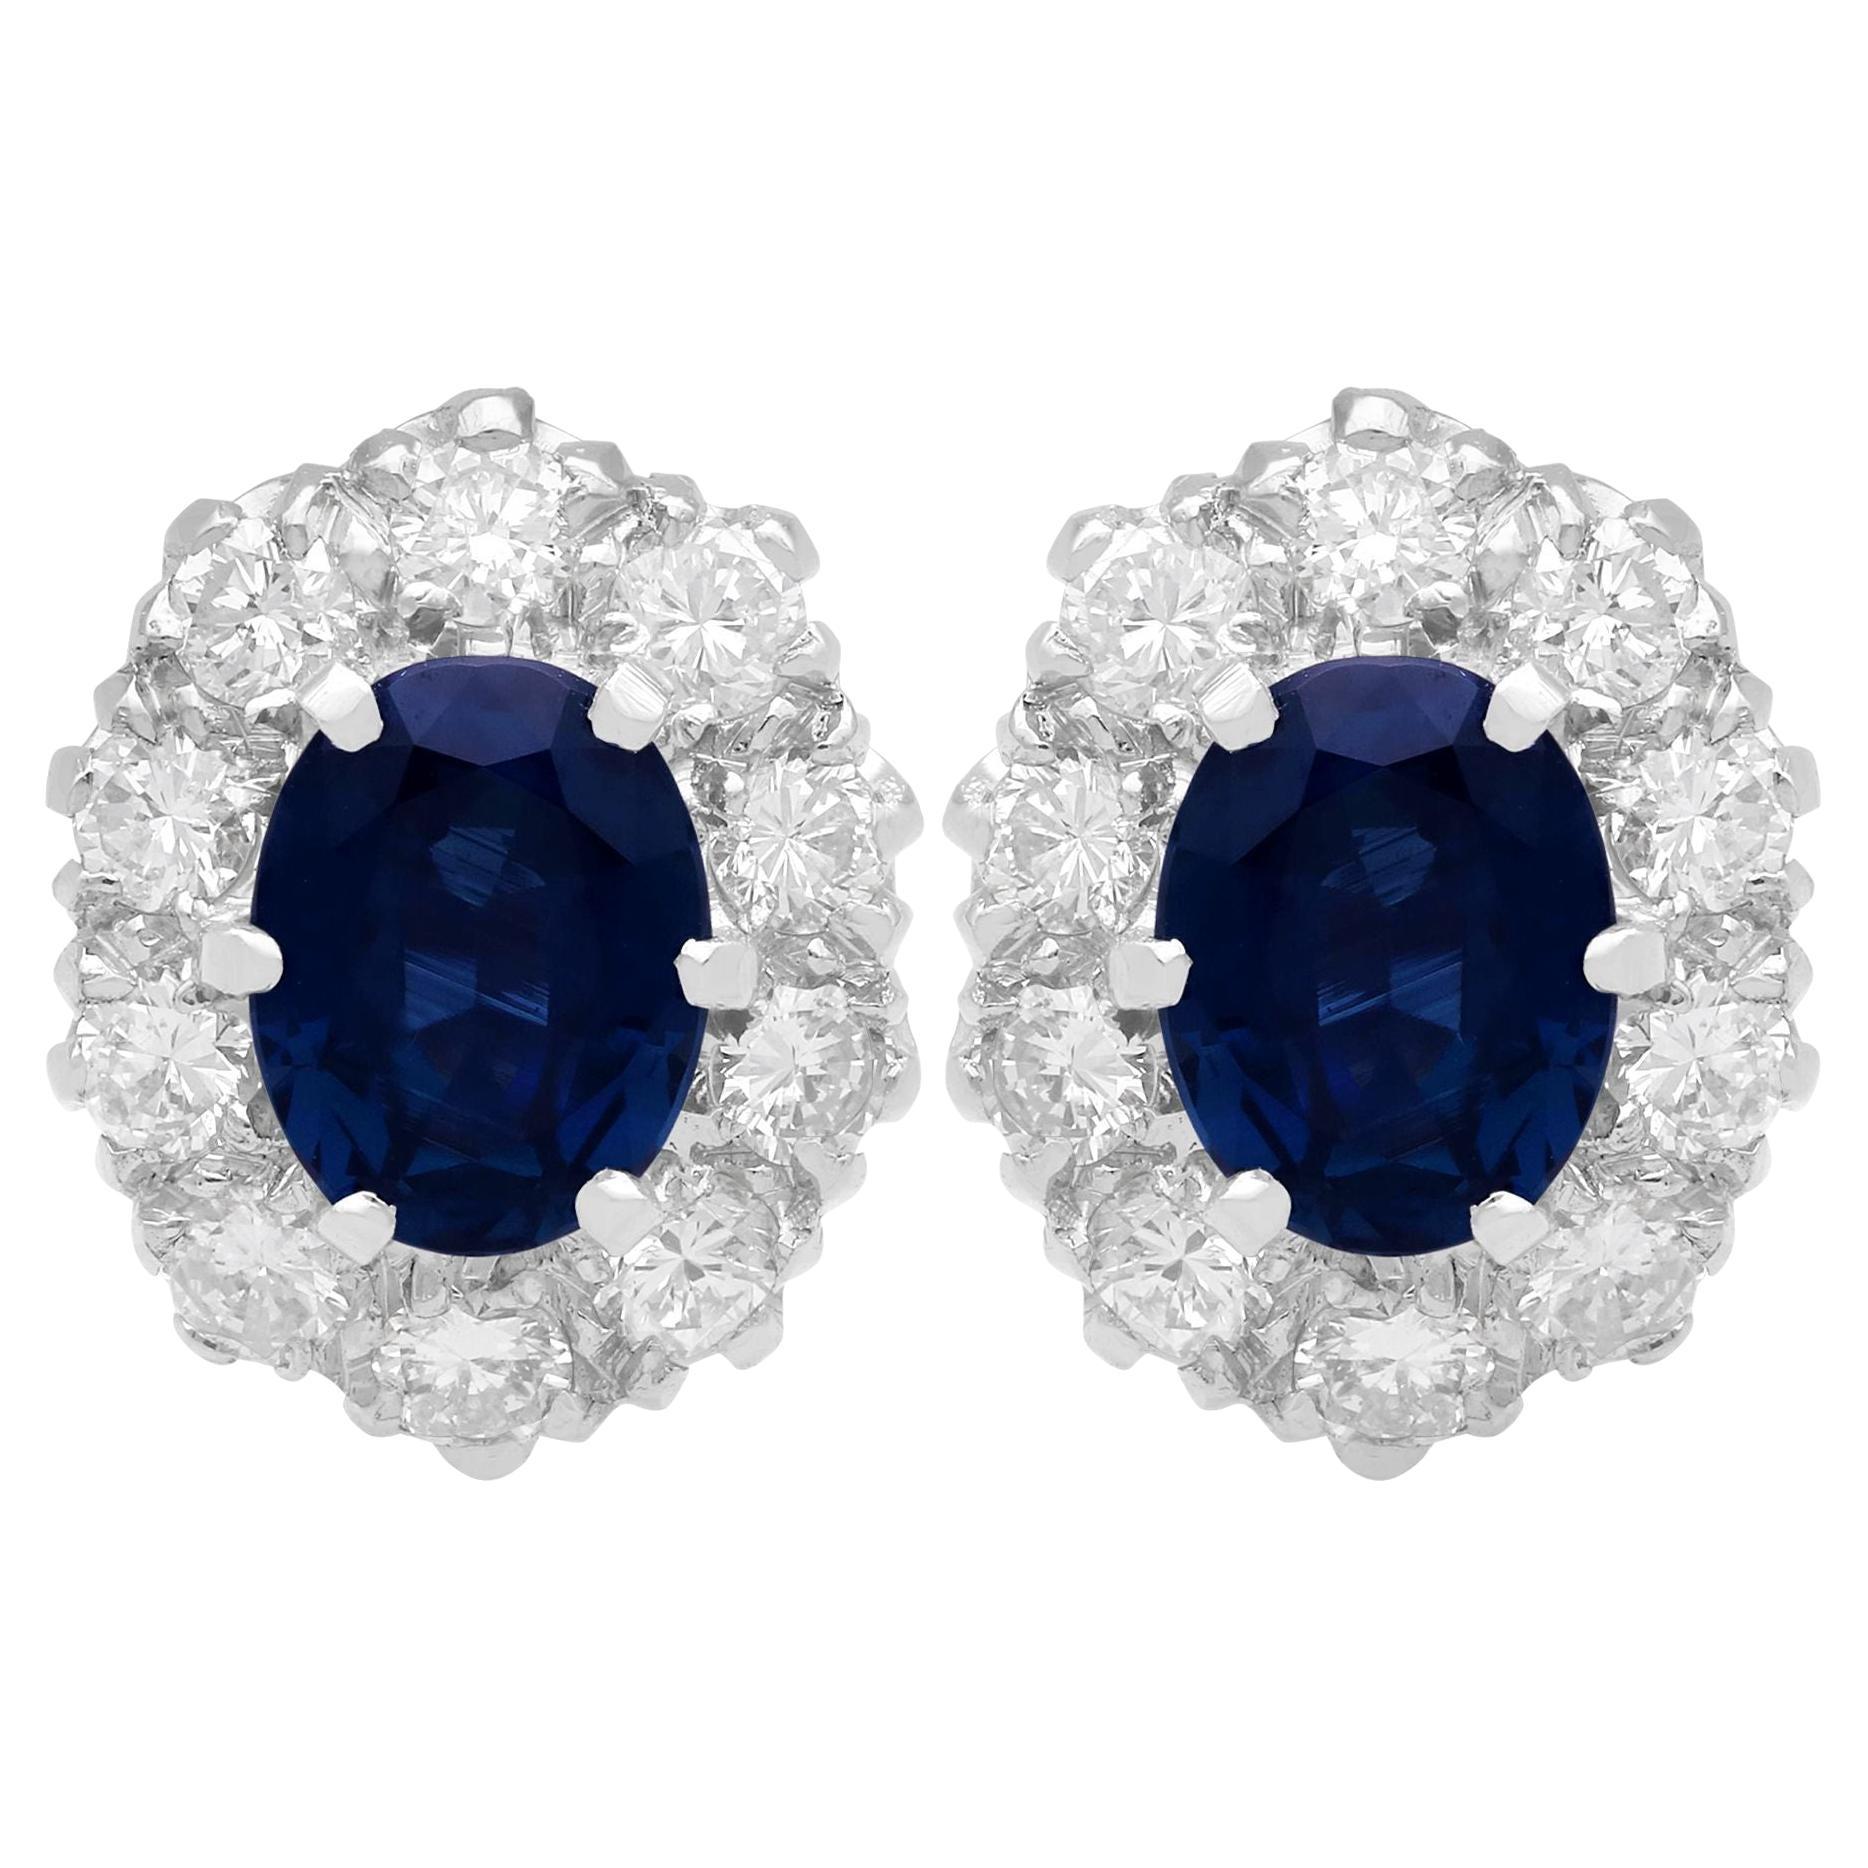 Vintage 2.75 Carat Sapphire and 1.00 Carat Diamond Yellow Gold Cluster Earrings